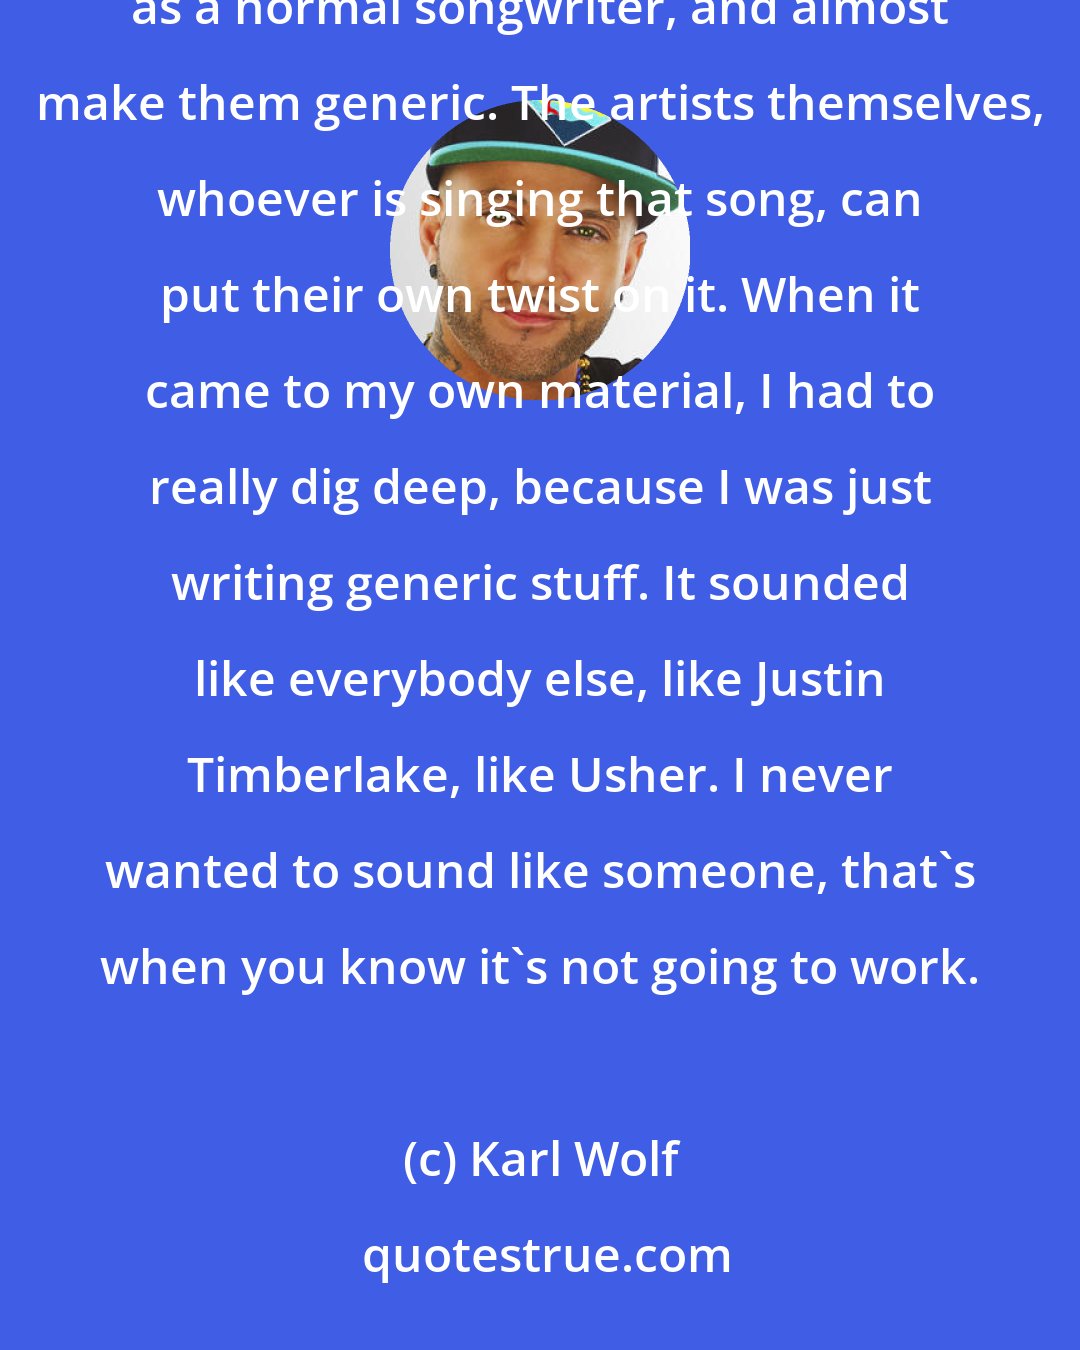 Karl Wolf: Trying to make your own sound is hard. When I was producing for other artists, I could just produce and write songs as a normal songwriter, and almost make them generic. The artists themselves, whoever is singing that song, can put their own twist on it. When it came to my own material, I had to really dig deep, because I was just writing generic stuff. It sounded like everybody else, like Justin Timberlake, like Usher. I never wanted to sound like someone, that's when you know it's not going to work.